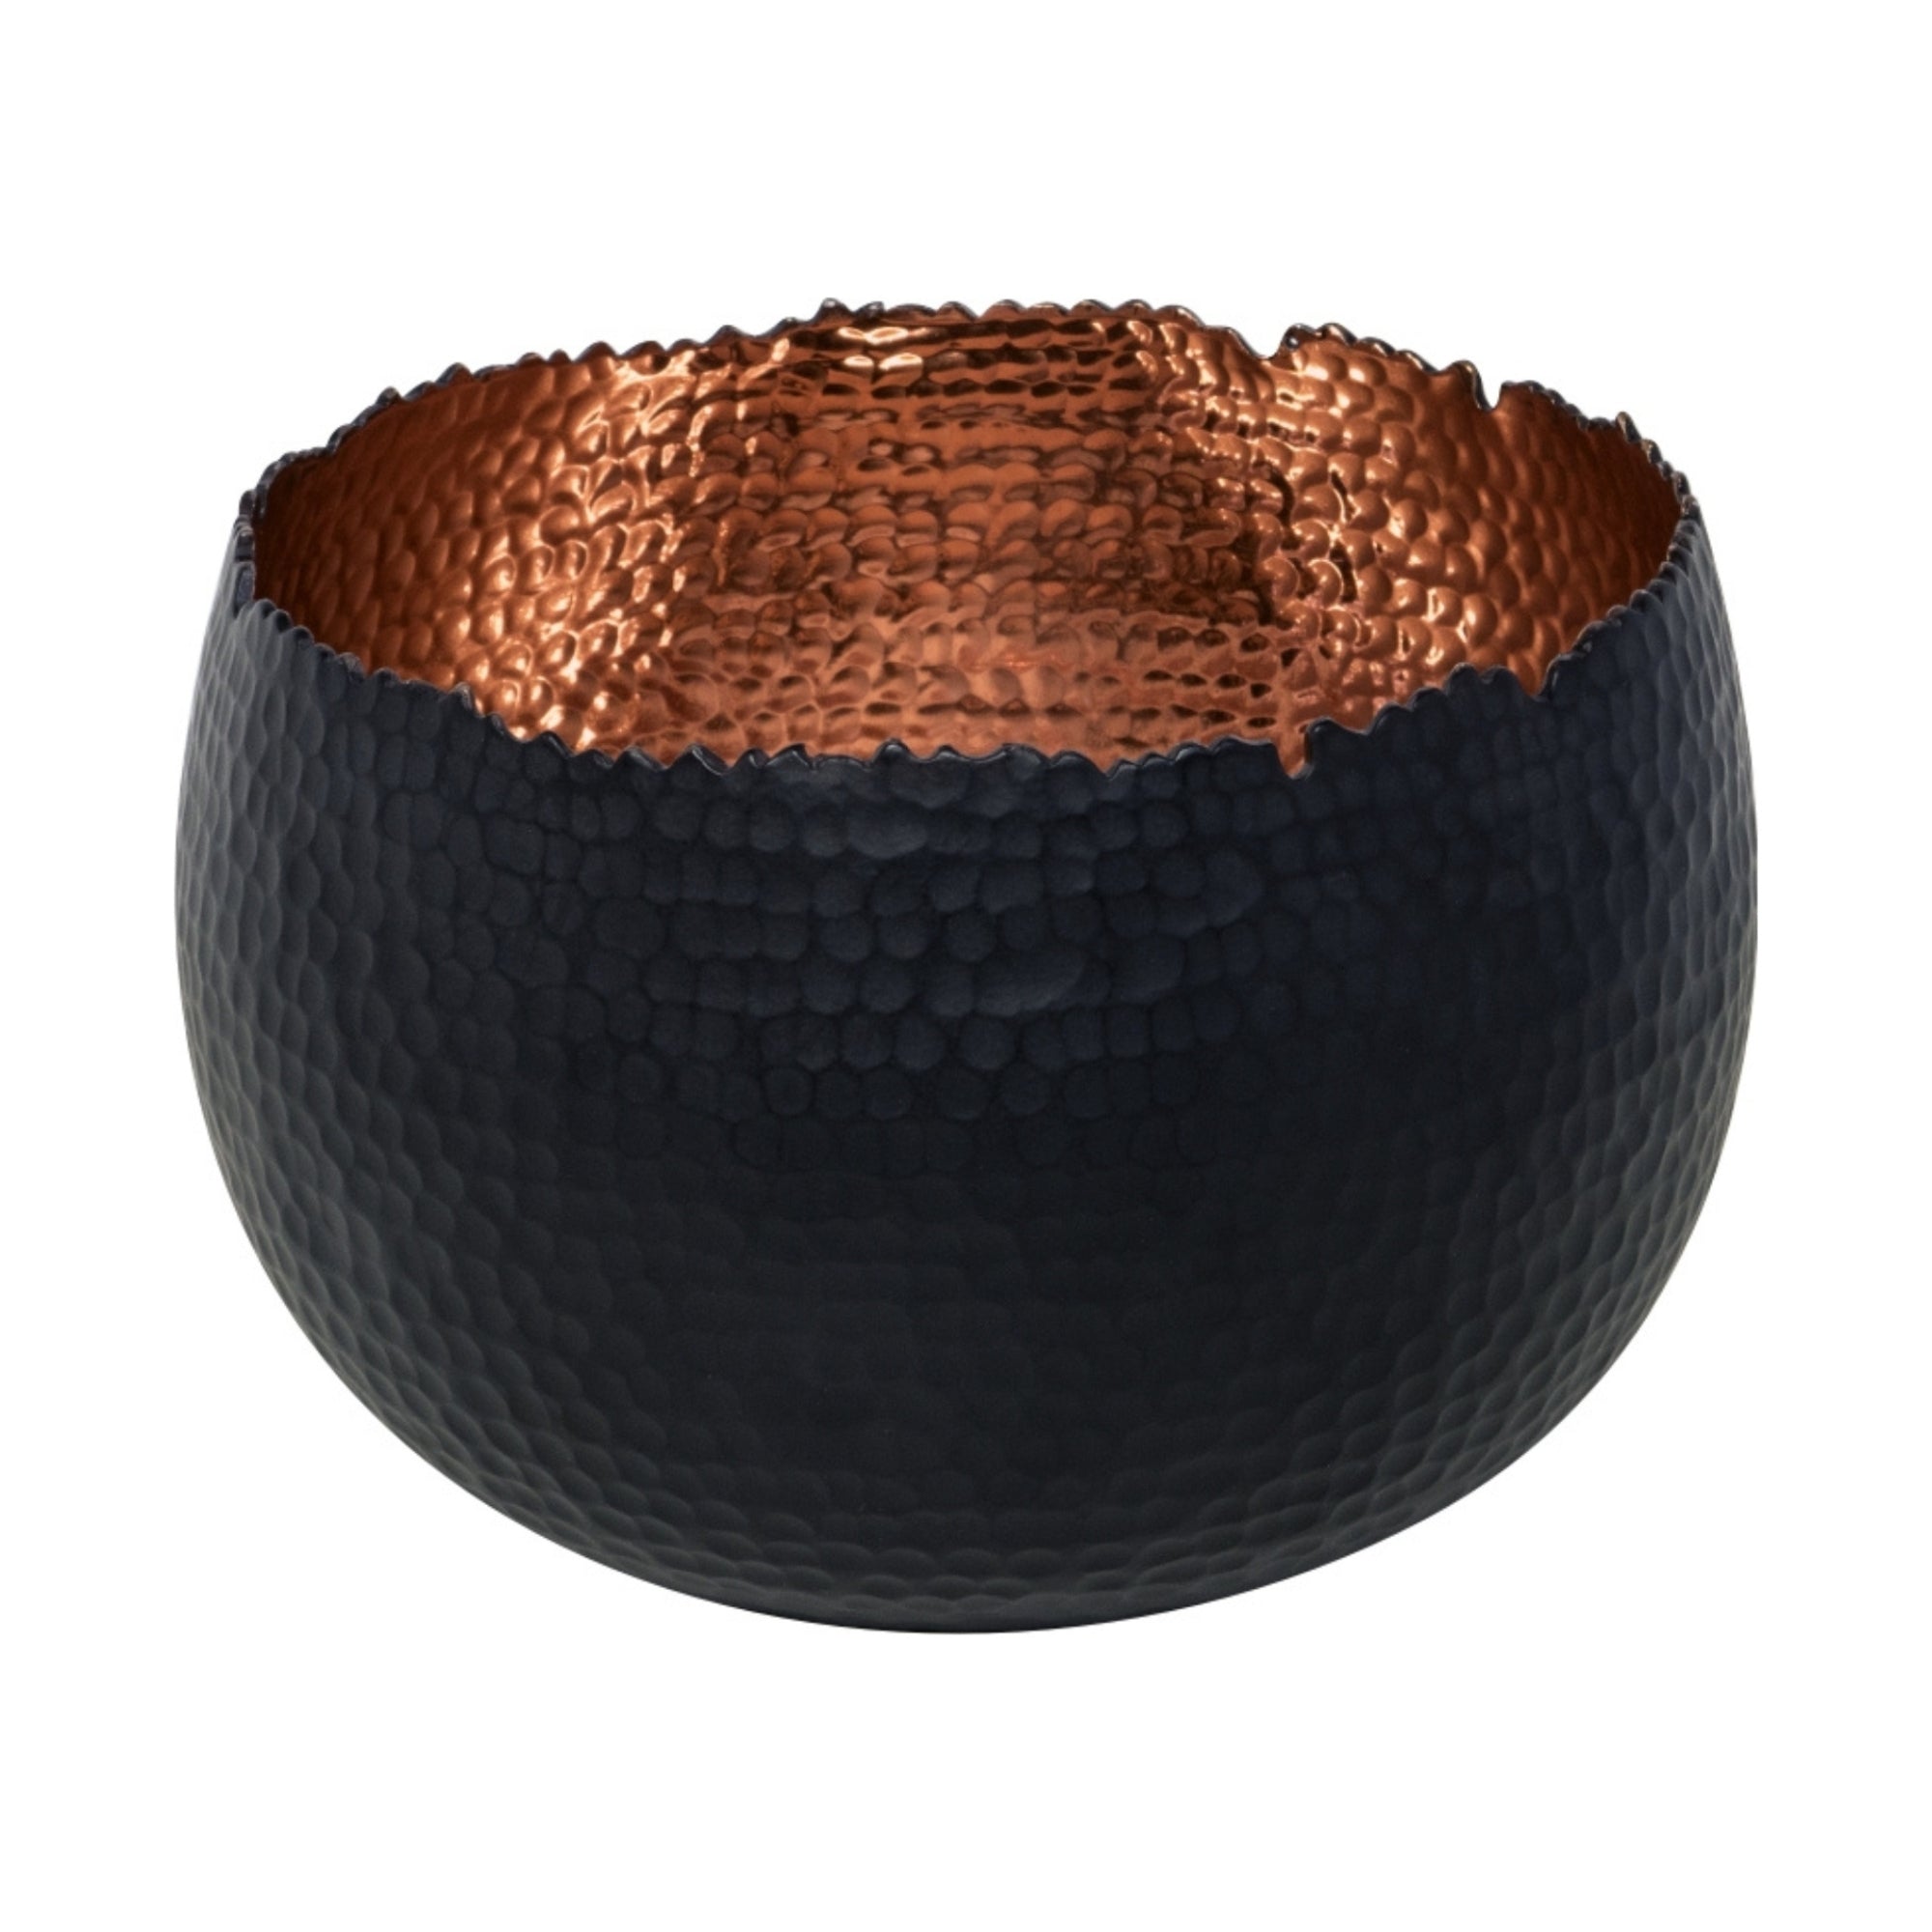 Hammered Bowl Black / Copper Small